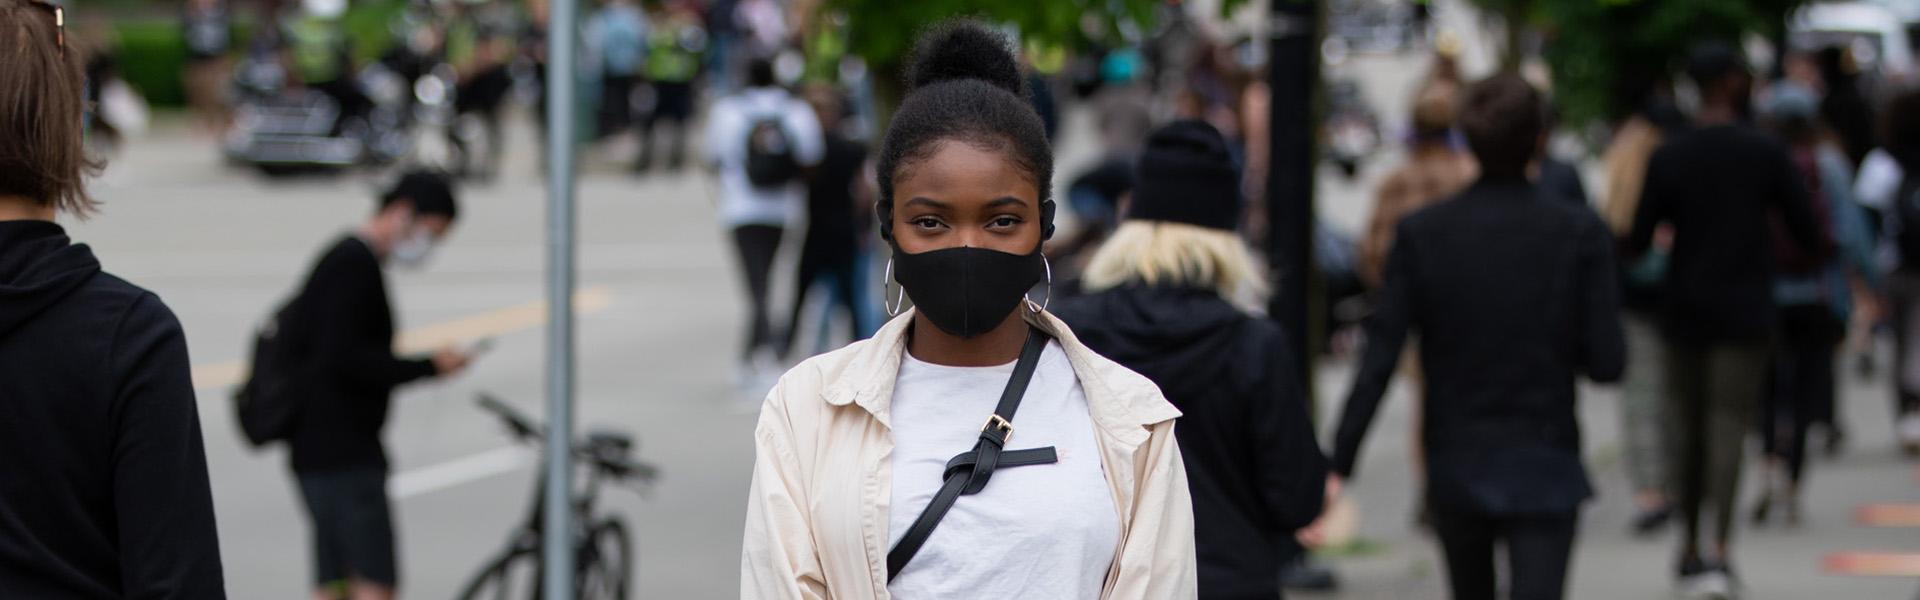 Woman standing on a busy sidewalk wearing a black face mask.